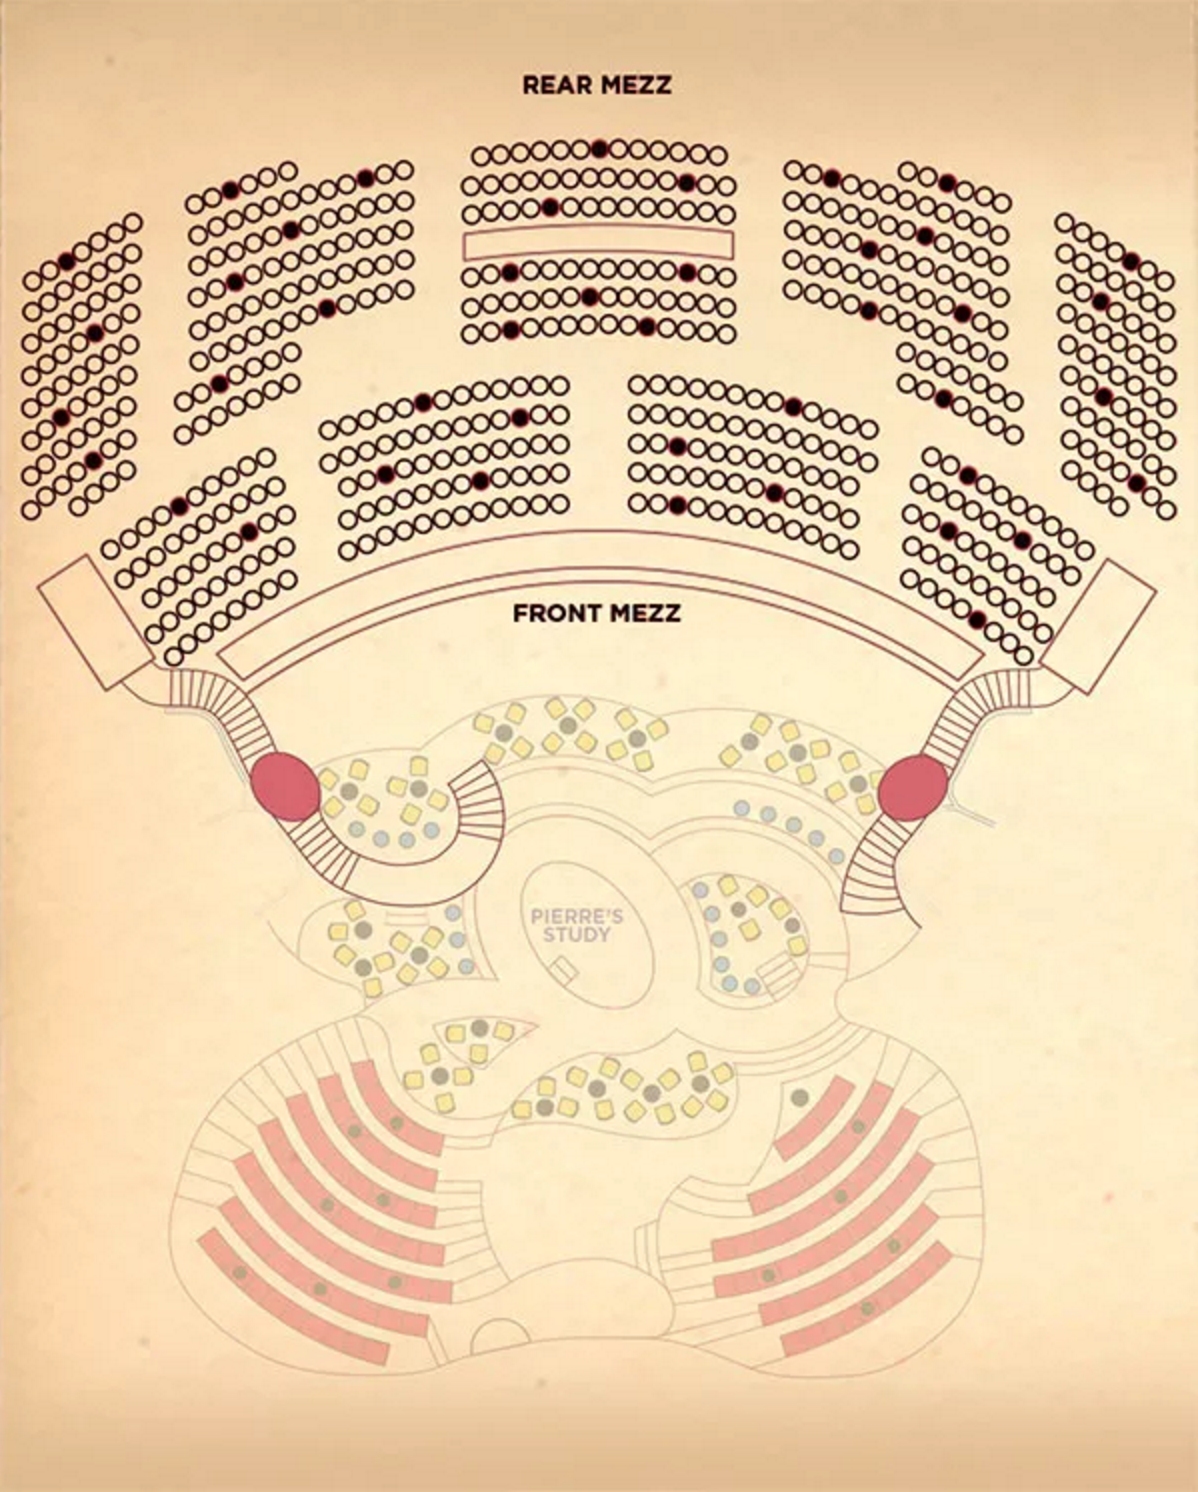 Great Comet Of 1812 Seating Chart